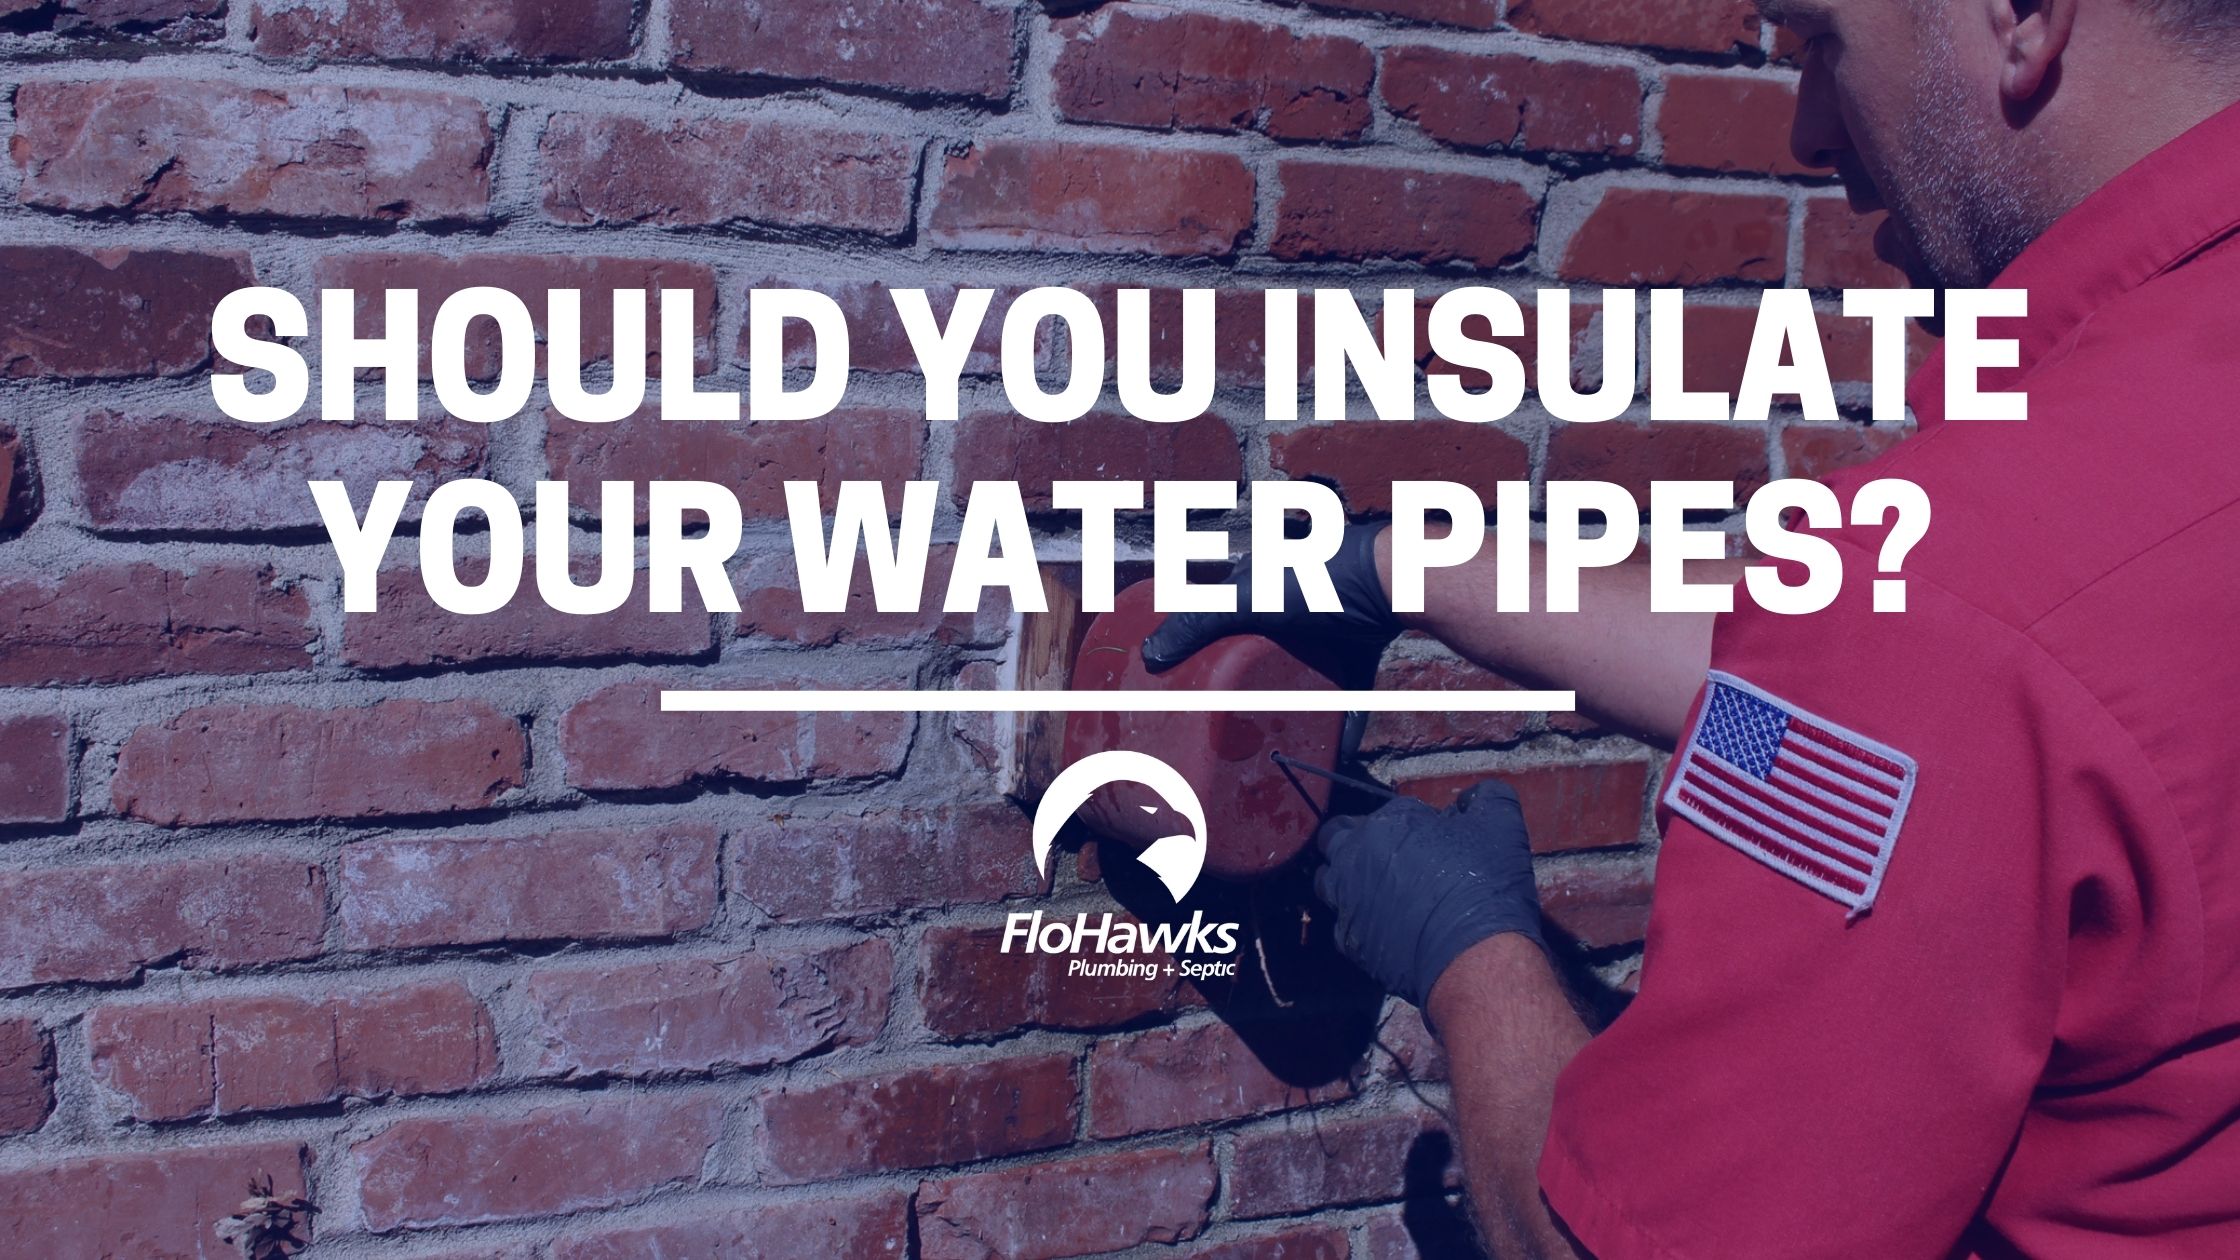 https://flohawks.com/wp-content/uploads/Should-You-Insulate-Your-Water-Pipes.jpg